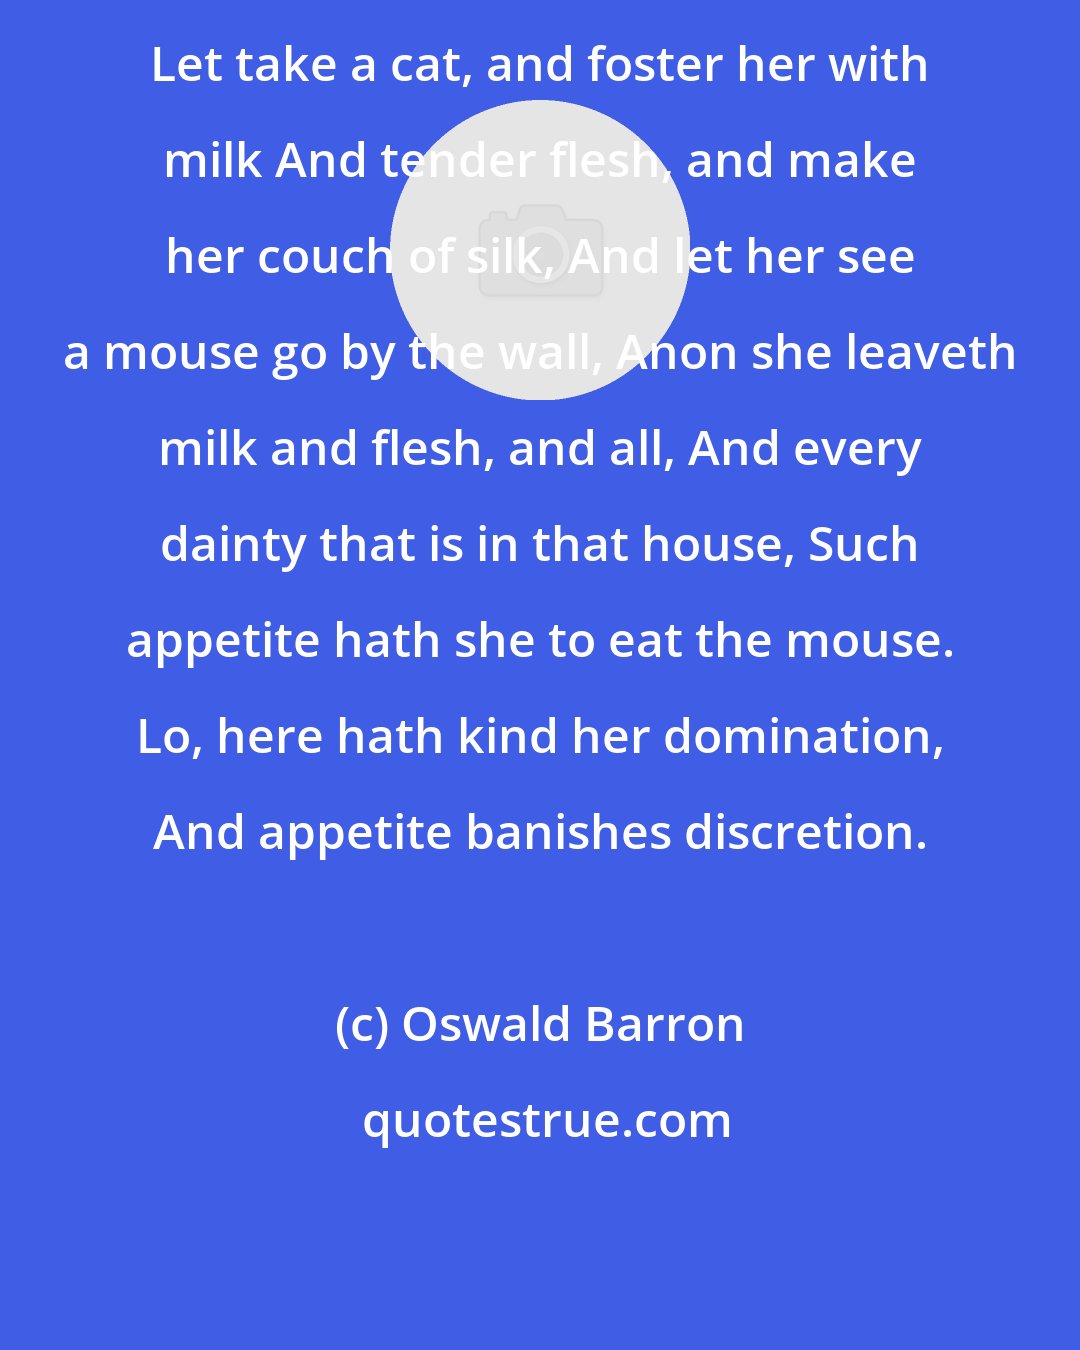 Oswald Barron: Let take a cat, and foster her with milk And tender flesh, and make her couch of silk, And let her see a mouse go by the wall, Anon she leaveth milk and flesh, and all, And every dainty that is in that house, Such appetite hath she to eat the mouse. Lo, here hath kind her domination, And appetite banishes discretion.